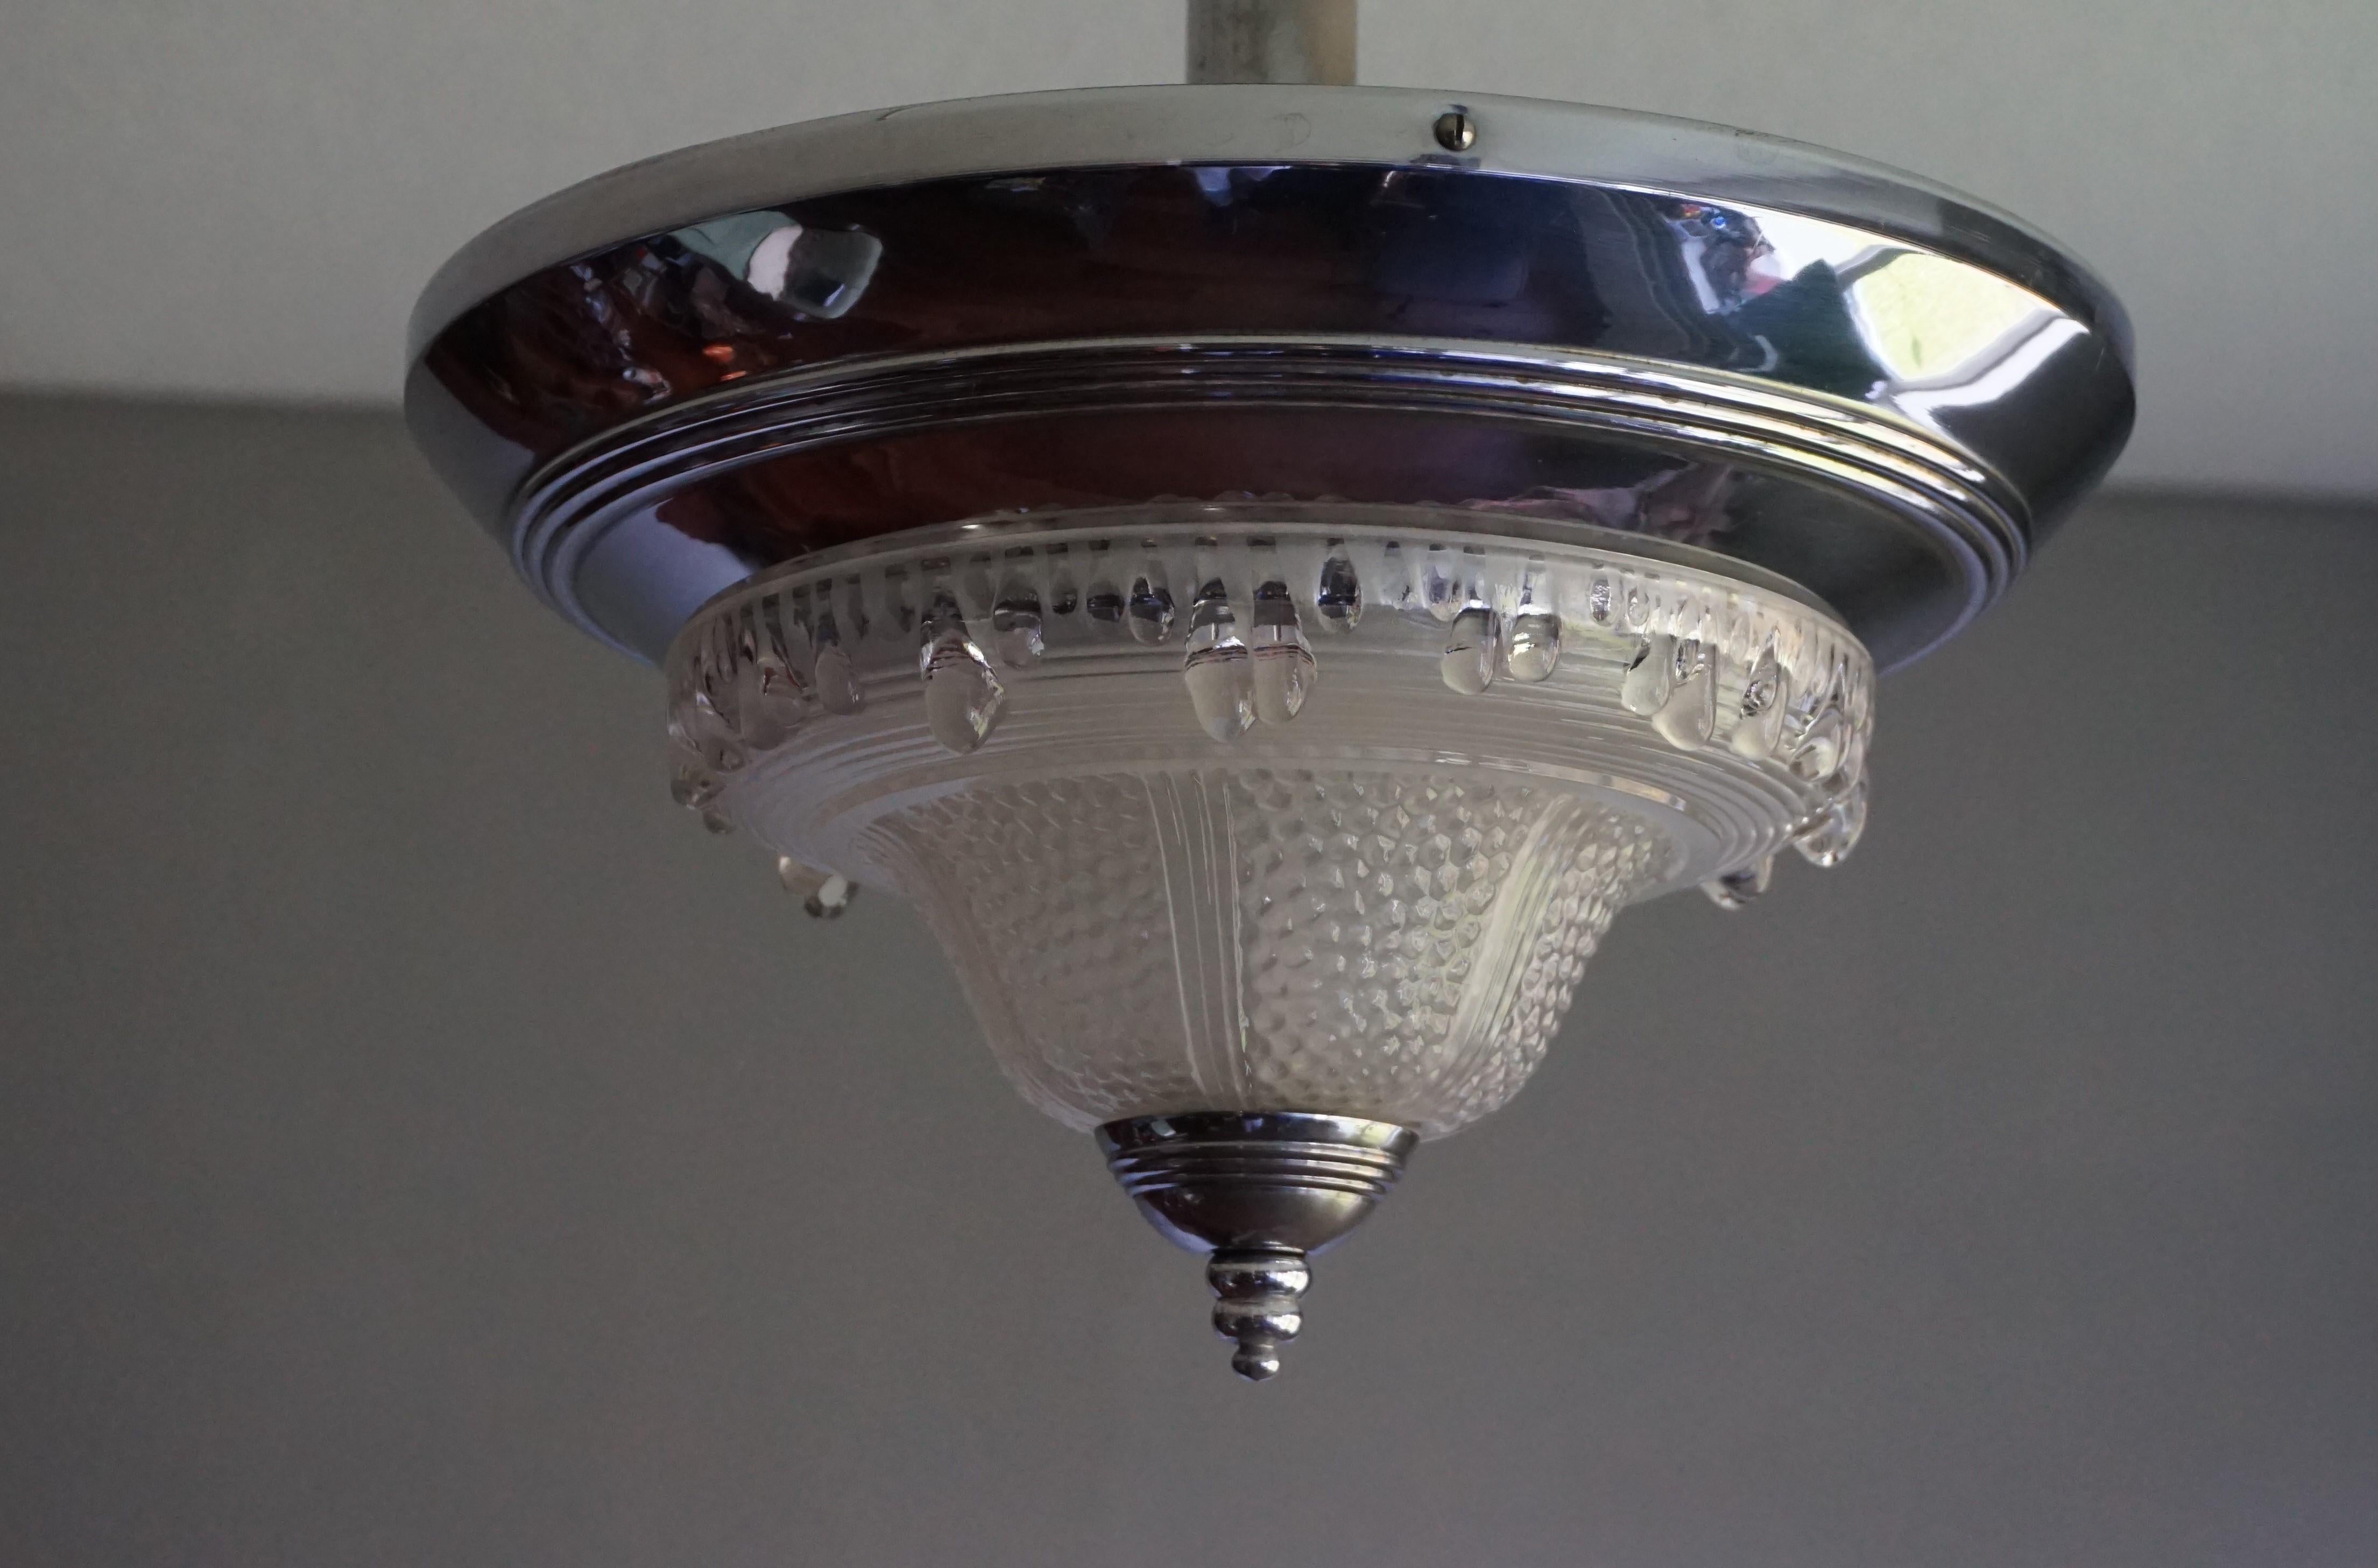 melted ice light fixture